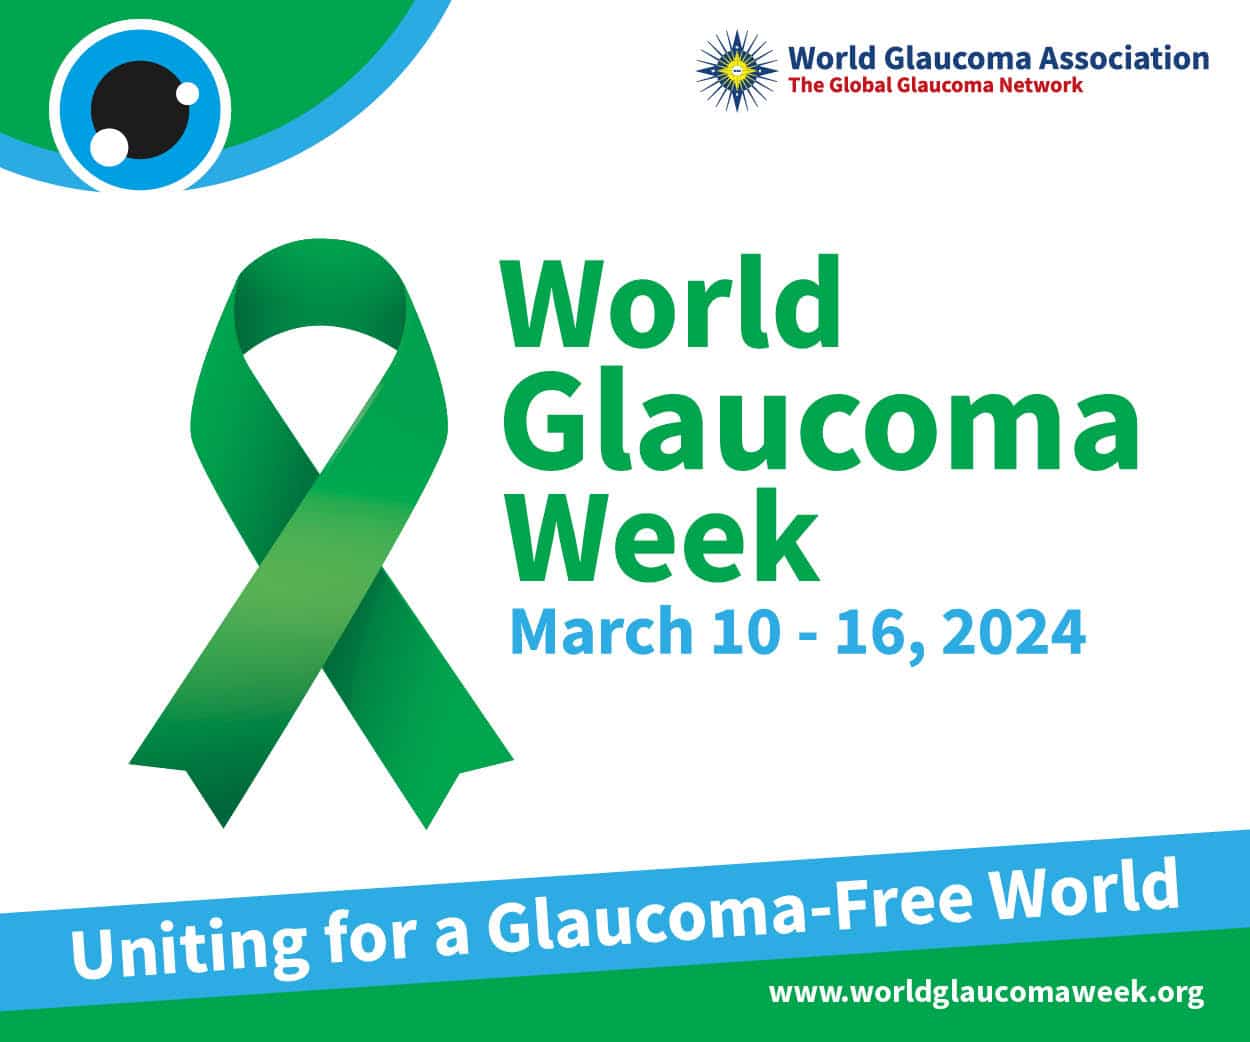 World Glaucoma Week green logo and "March 10 - 16, 2024"